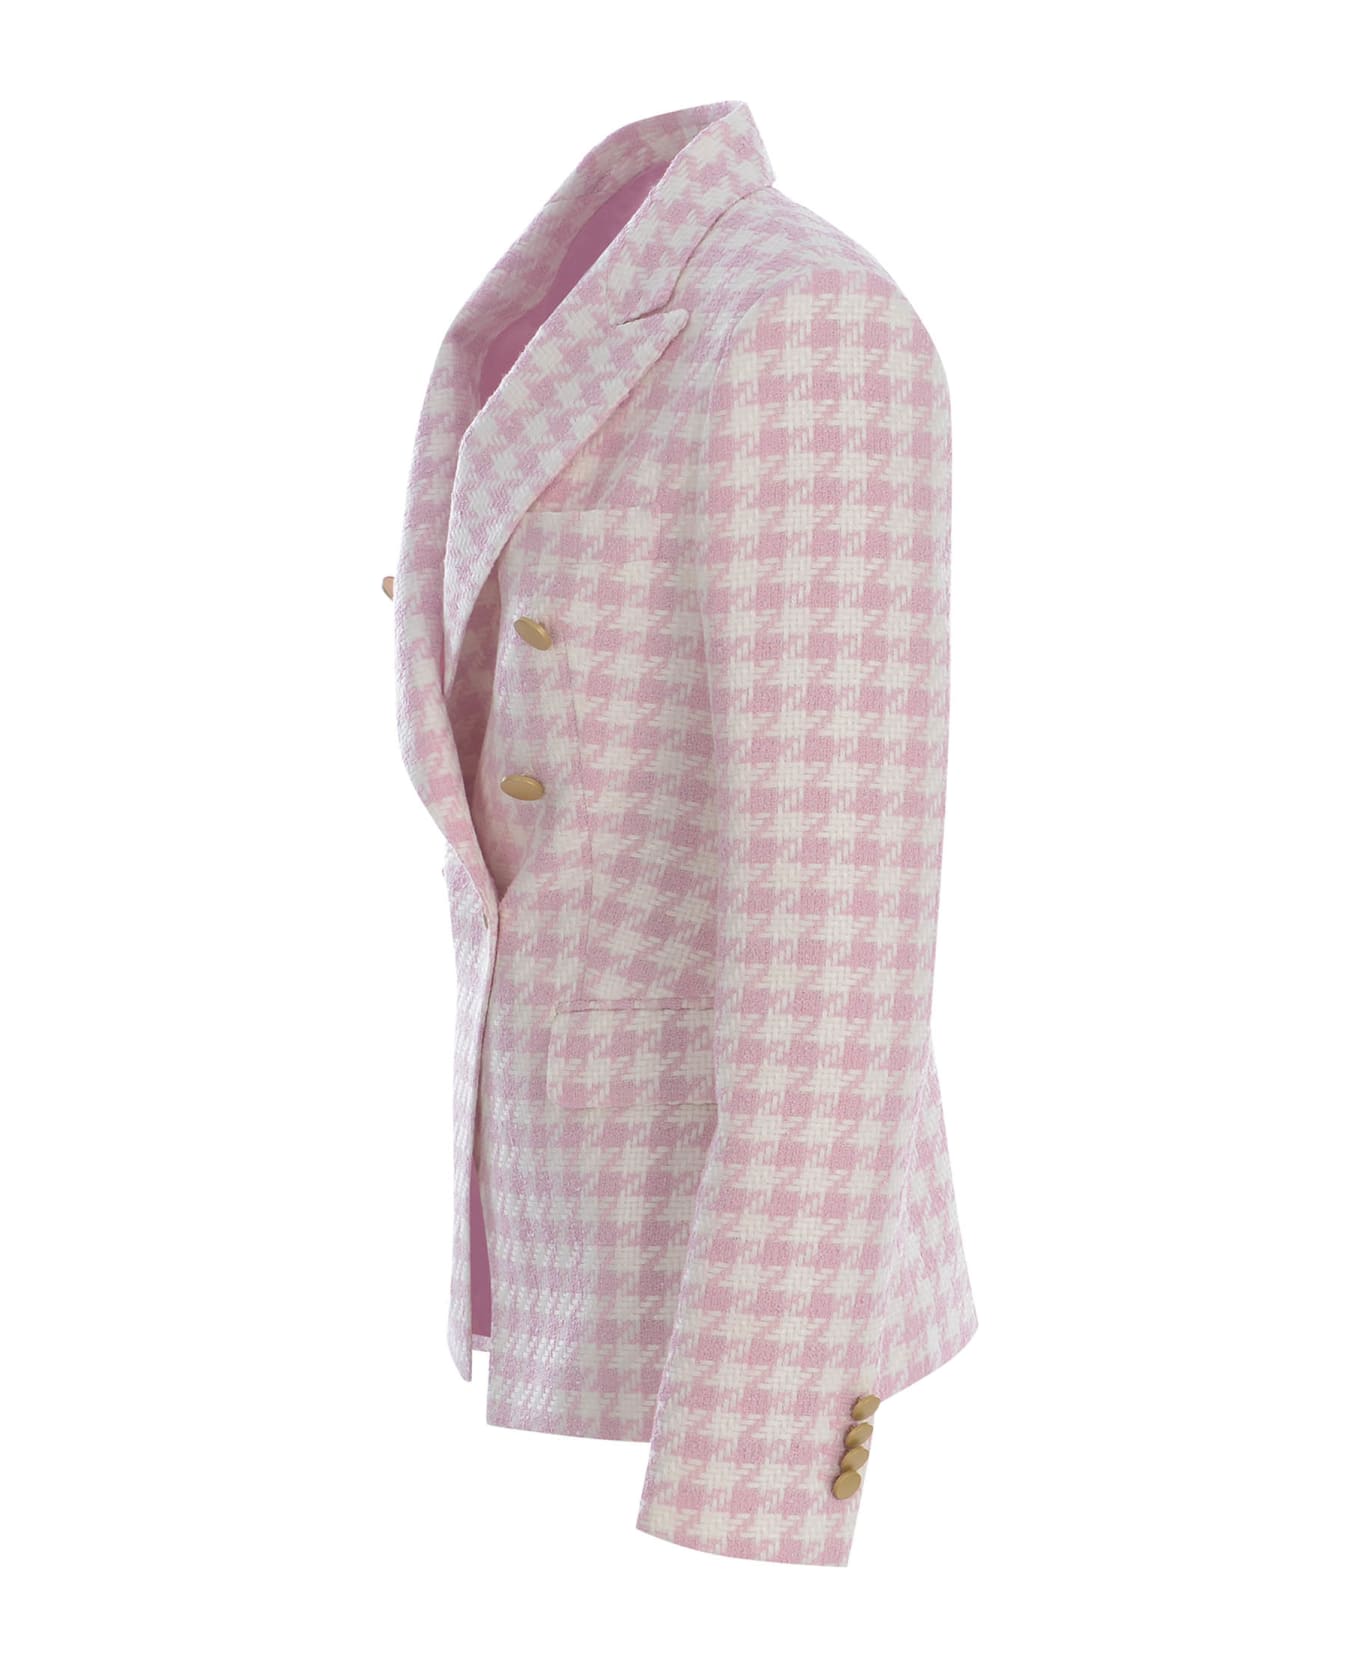 Tagliatore Double-breasted Jacket Tagliatore "j-alycia" Made Of Houndstooth - Rosa